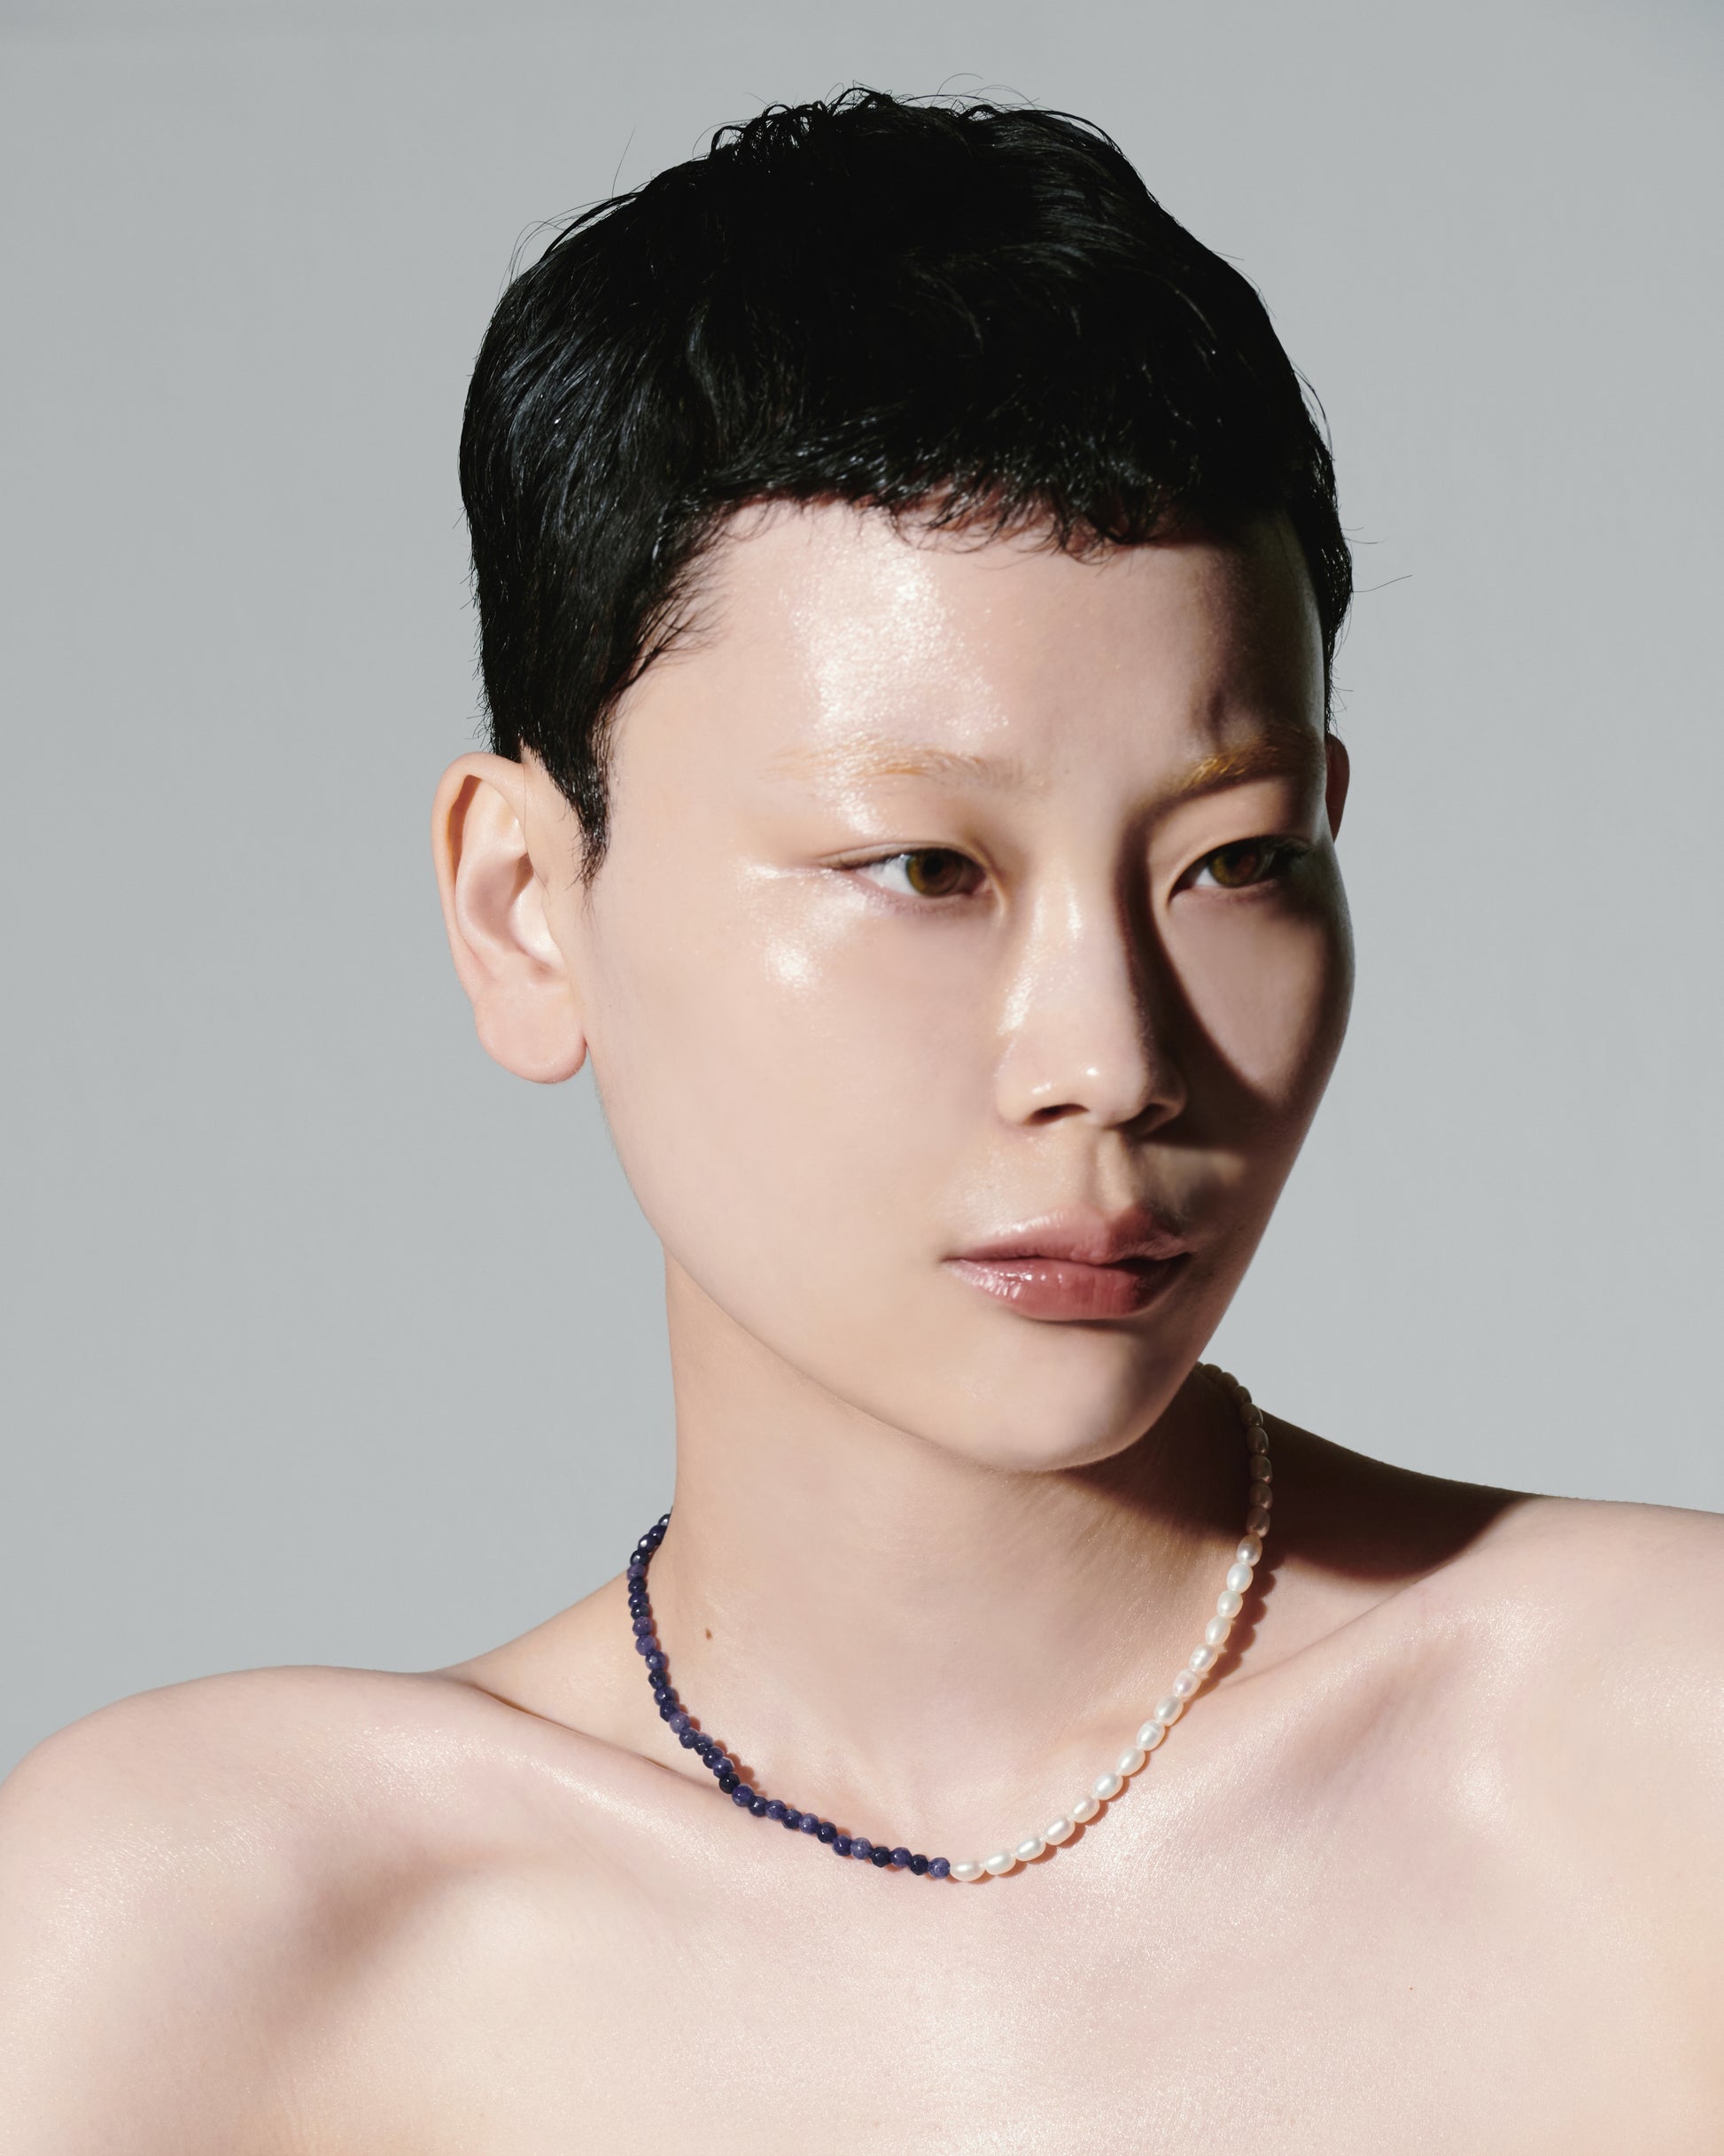 Juxtaposition Studio Seoul Korea Wink Necklace Amethyst Beads Freshwater Pearls Purple and Ivory Necklace Fashion Accessories